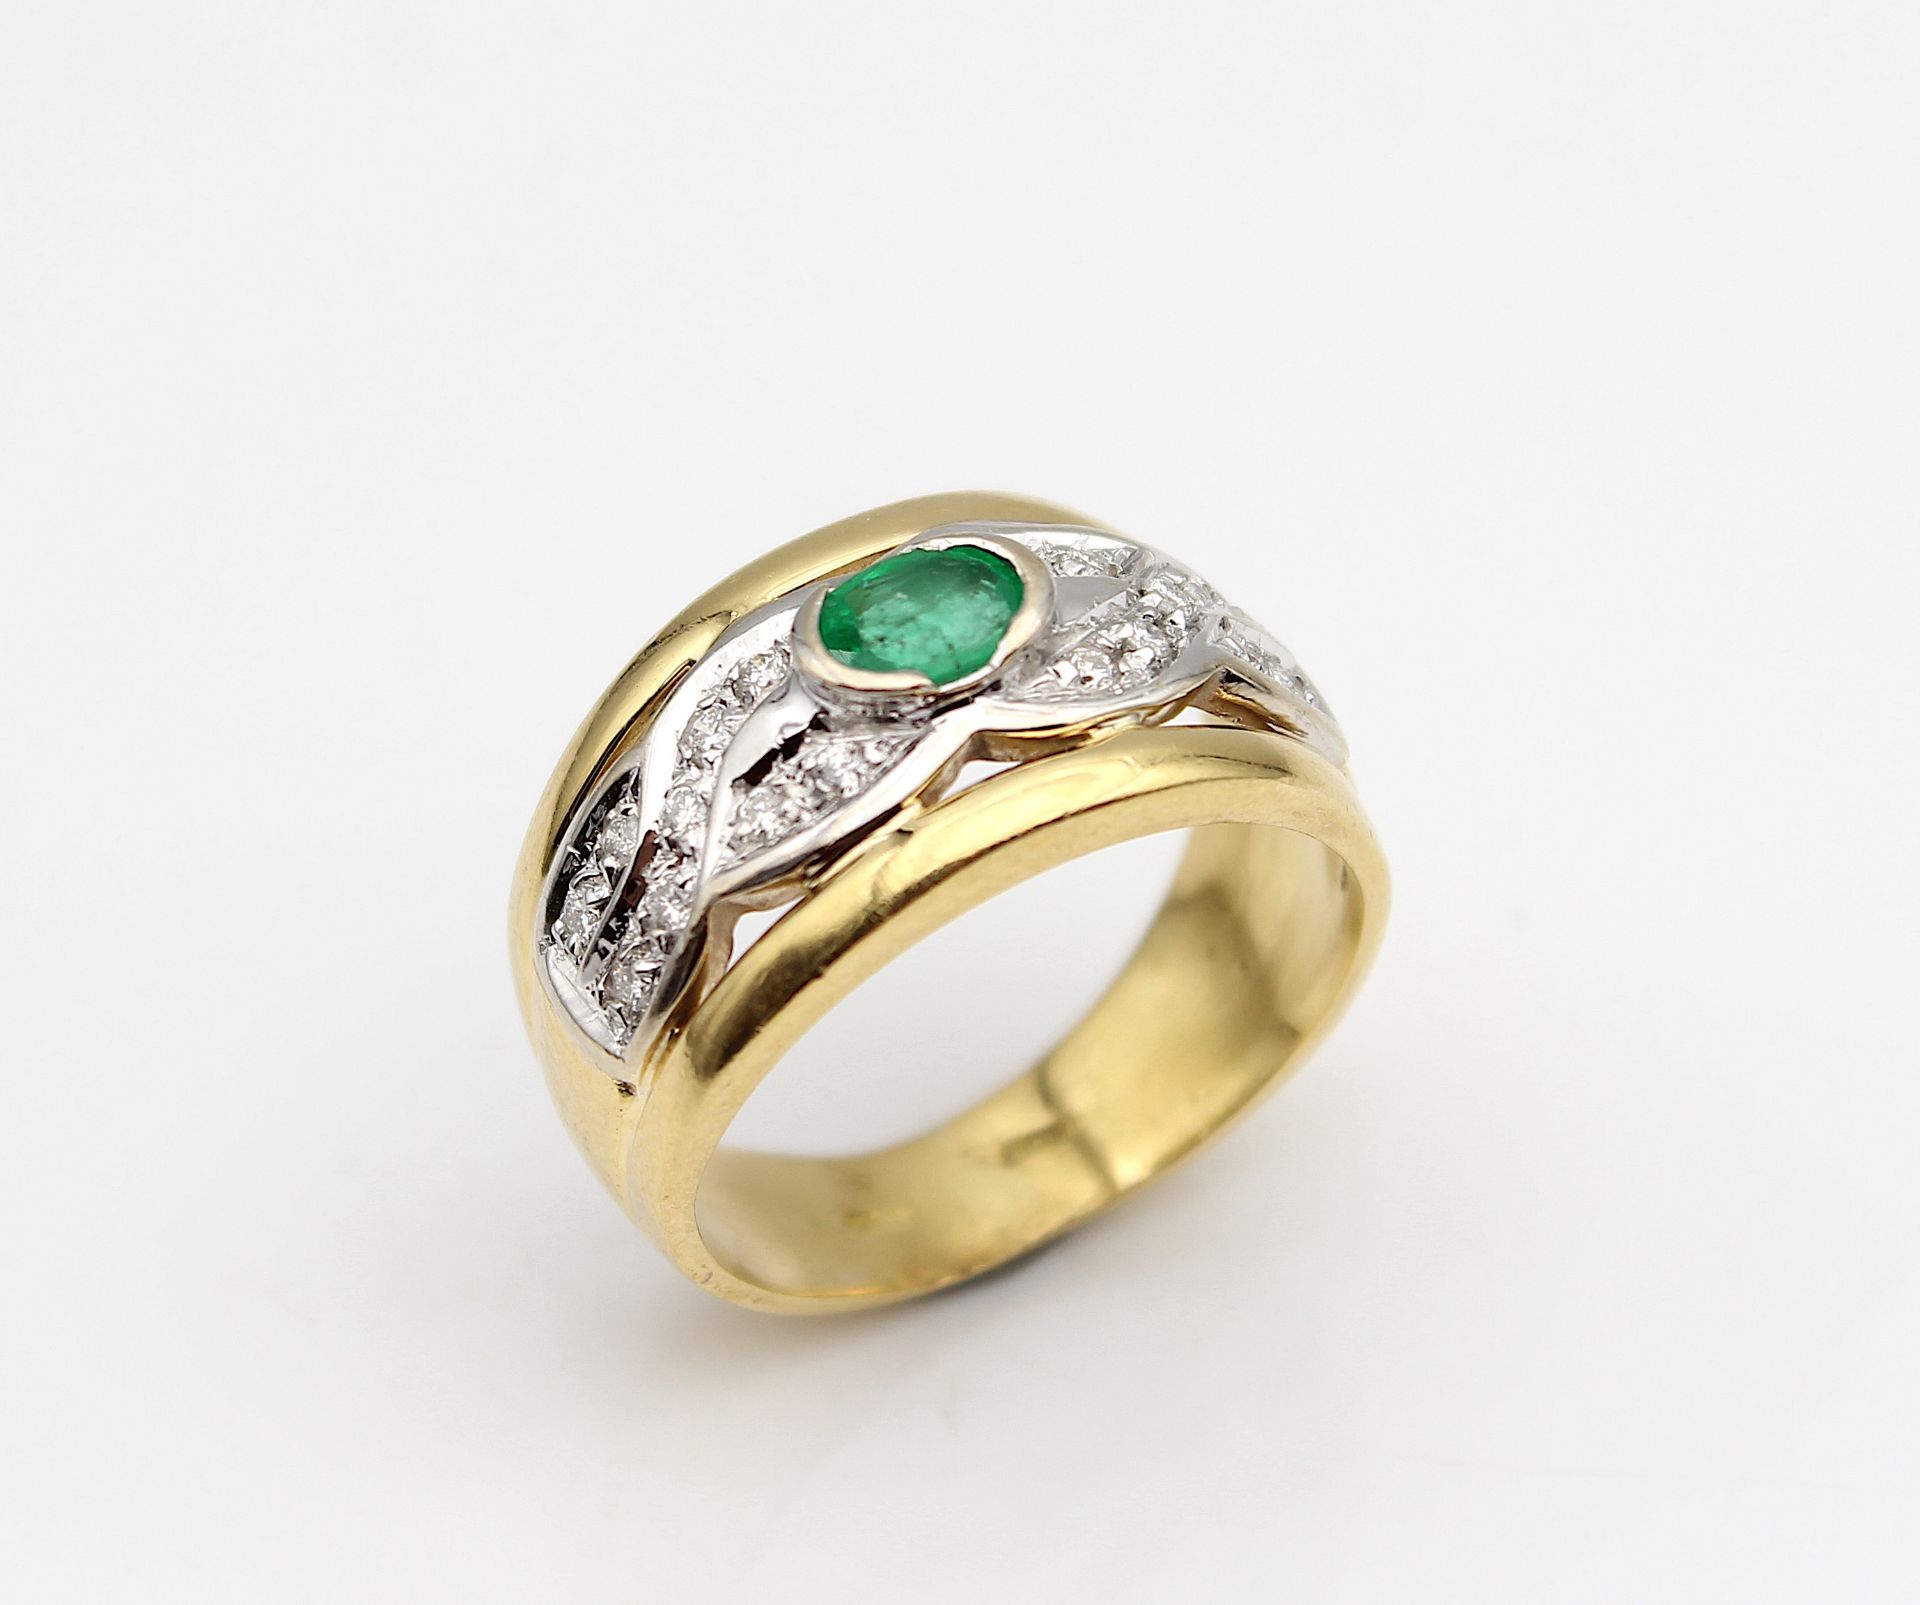 Charming ring with emerald and brilliants - Image 3 of 4